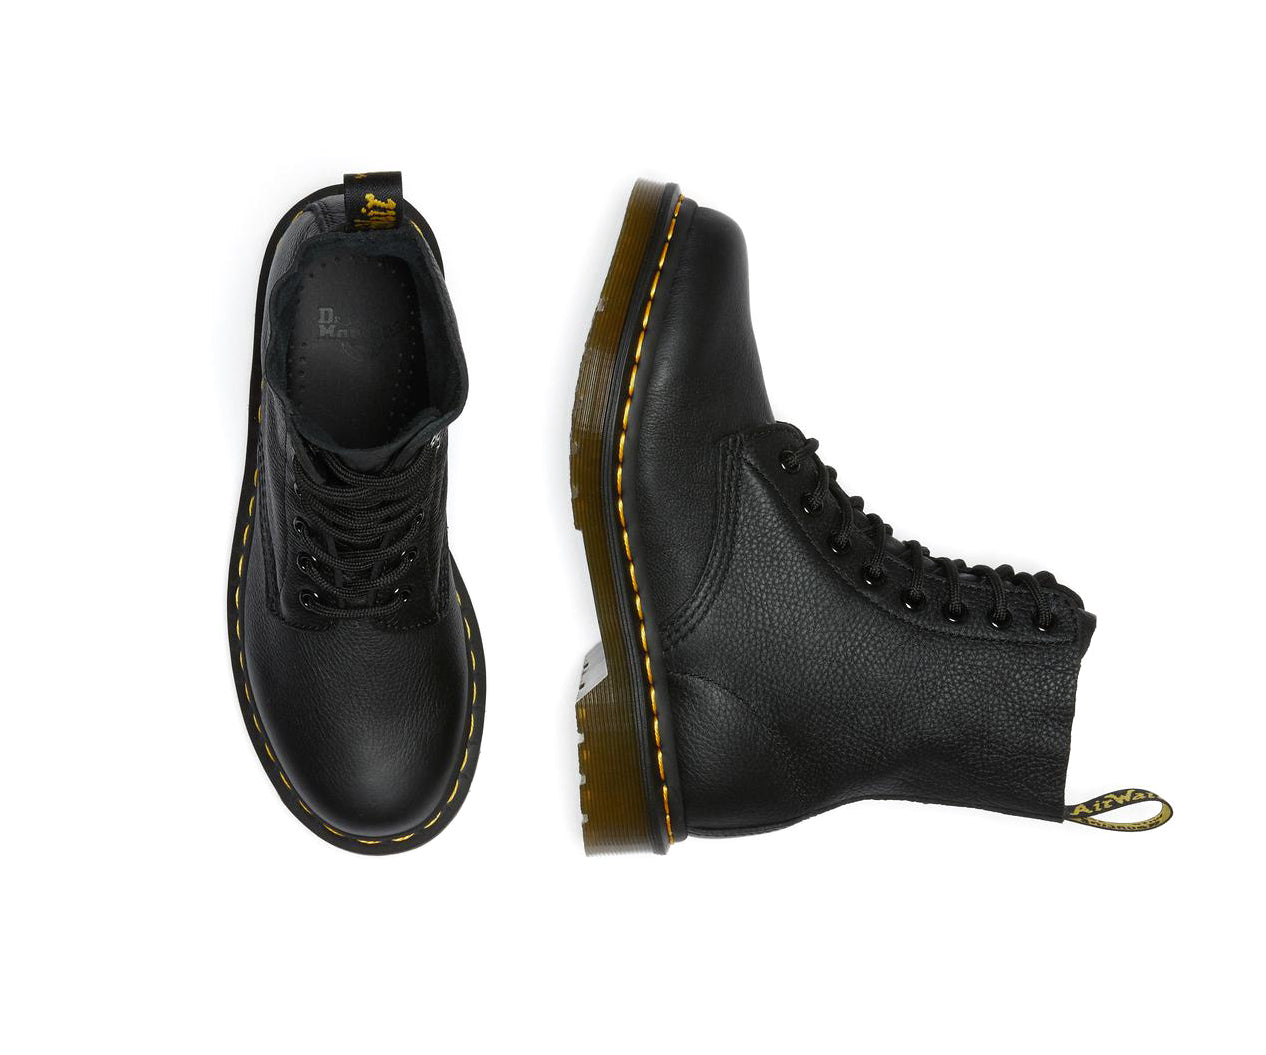 A black soft leather Dr. Martens ankle boot.